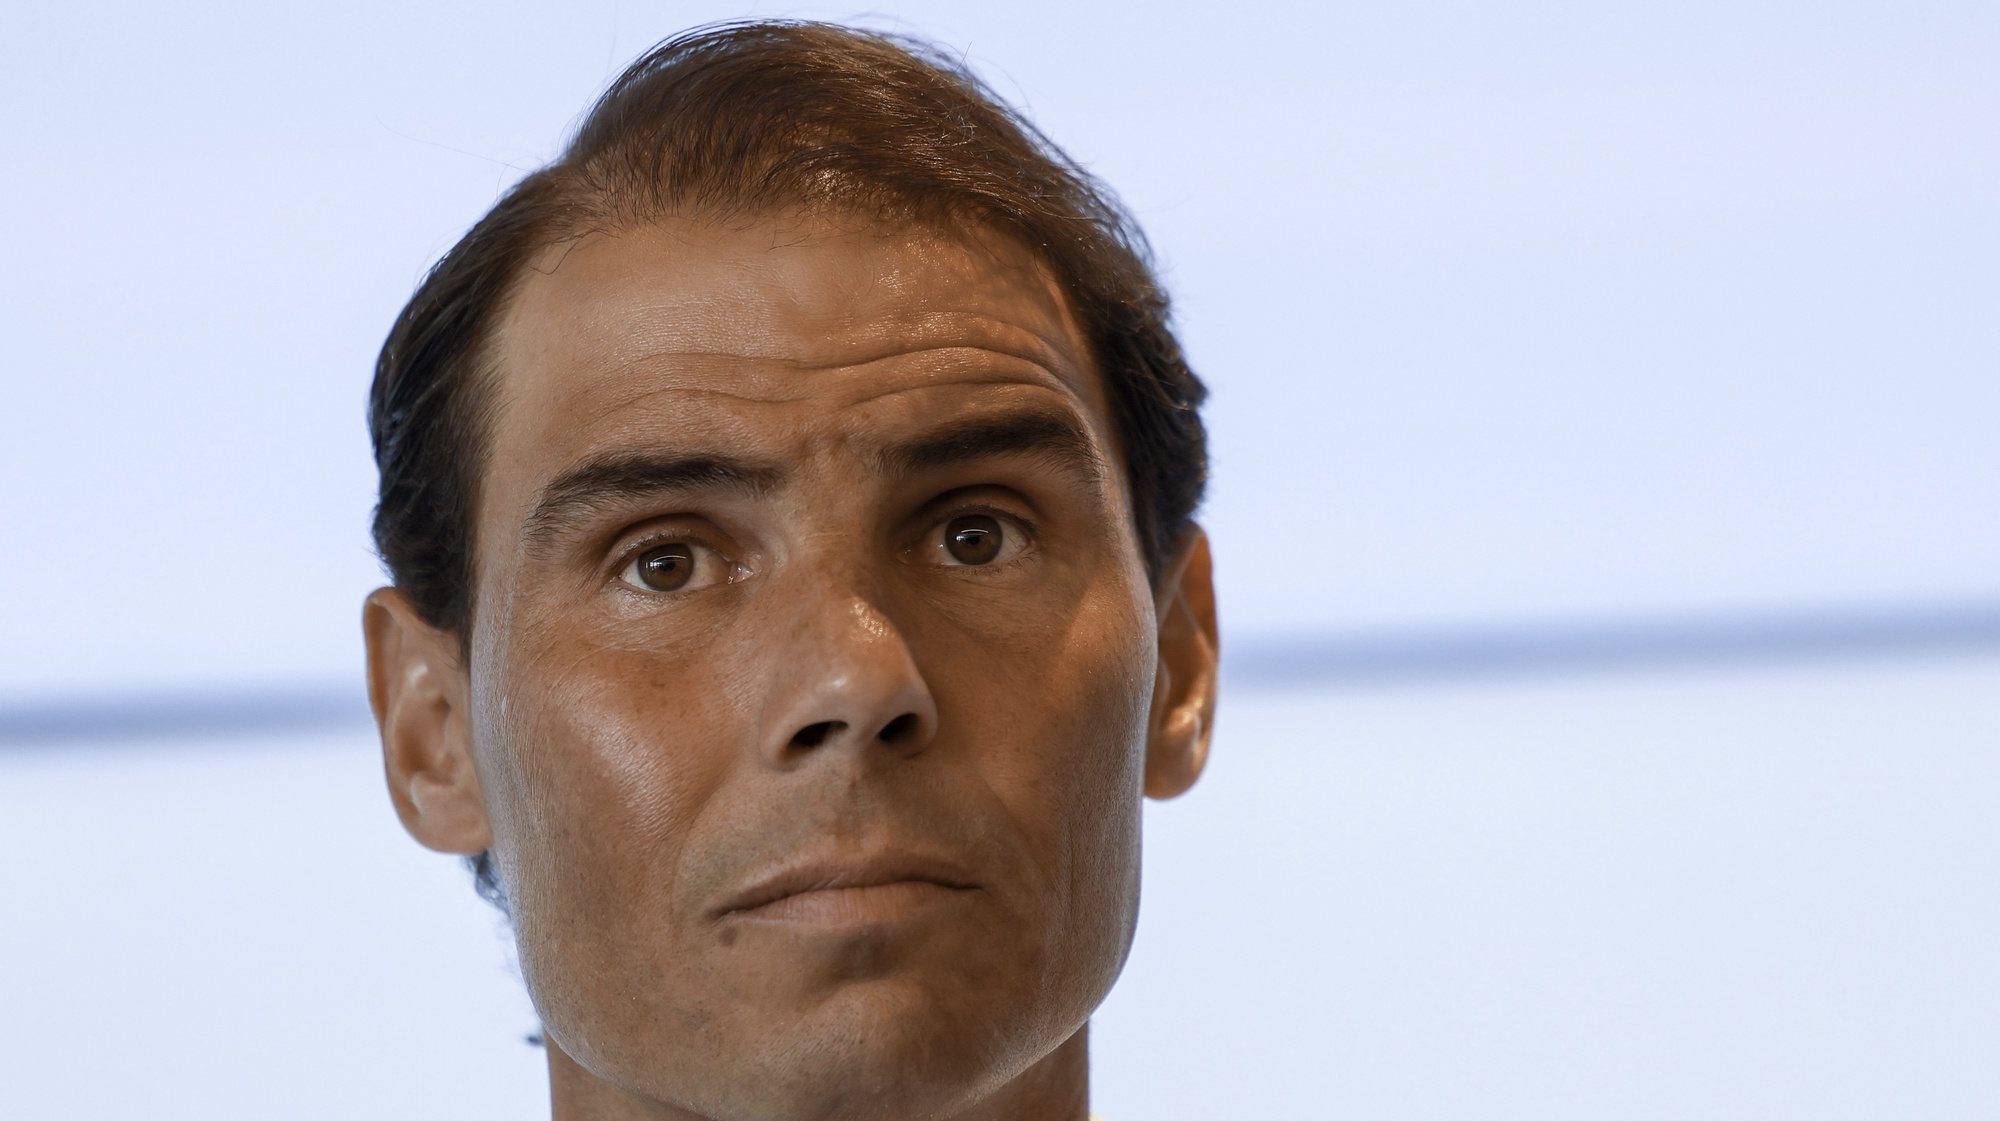 epa10636702 Spanish tennis player and 22-time Grand Slam winner Rafael Nadal delivers a press conference at Rafa Nadal Academy in Manacor, Mallorca, Balearic islands, Spain, 18 May 2023. Nadal announced his withdrawal from the upcoming Roland Garros tennis tournament due to an injury and stated that 2024 will most likely be his last year as a professional tennis player.  EPA/CATI CLADERA